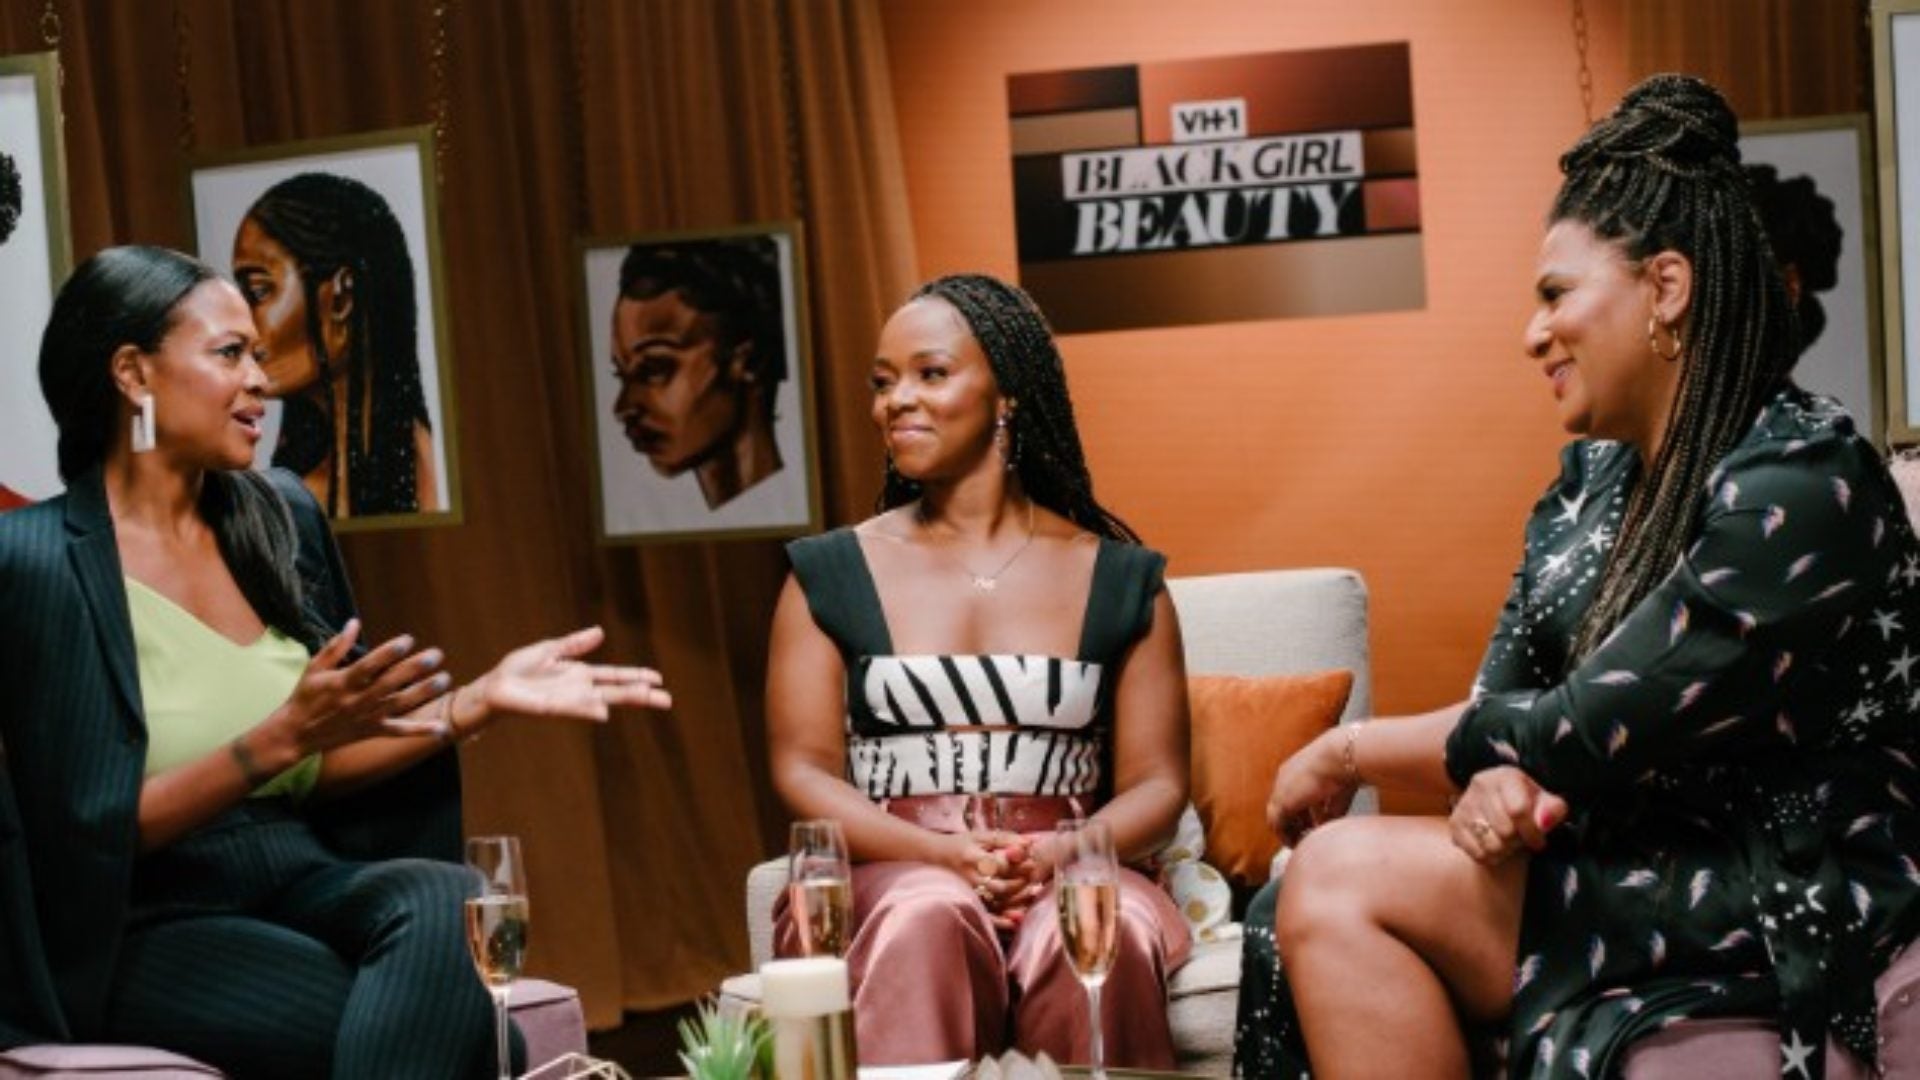 VH1 Is Launching A Show With Gia Peppers That's All About Black Girl Beauty